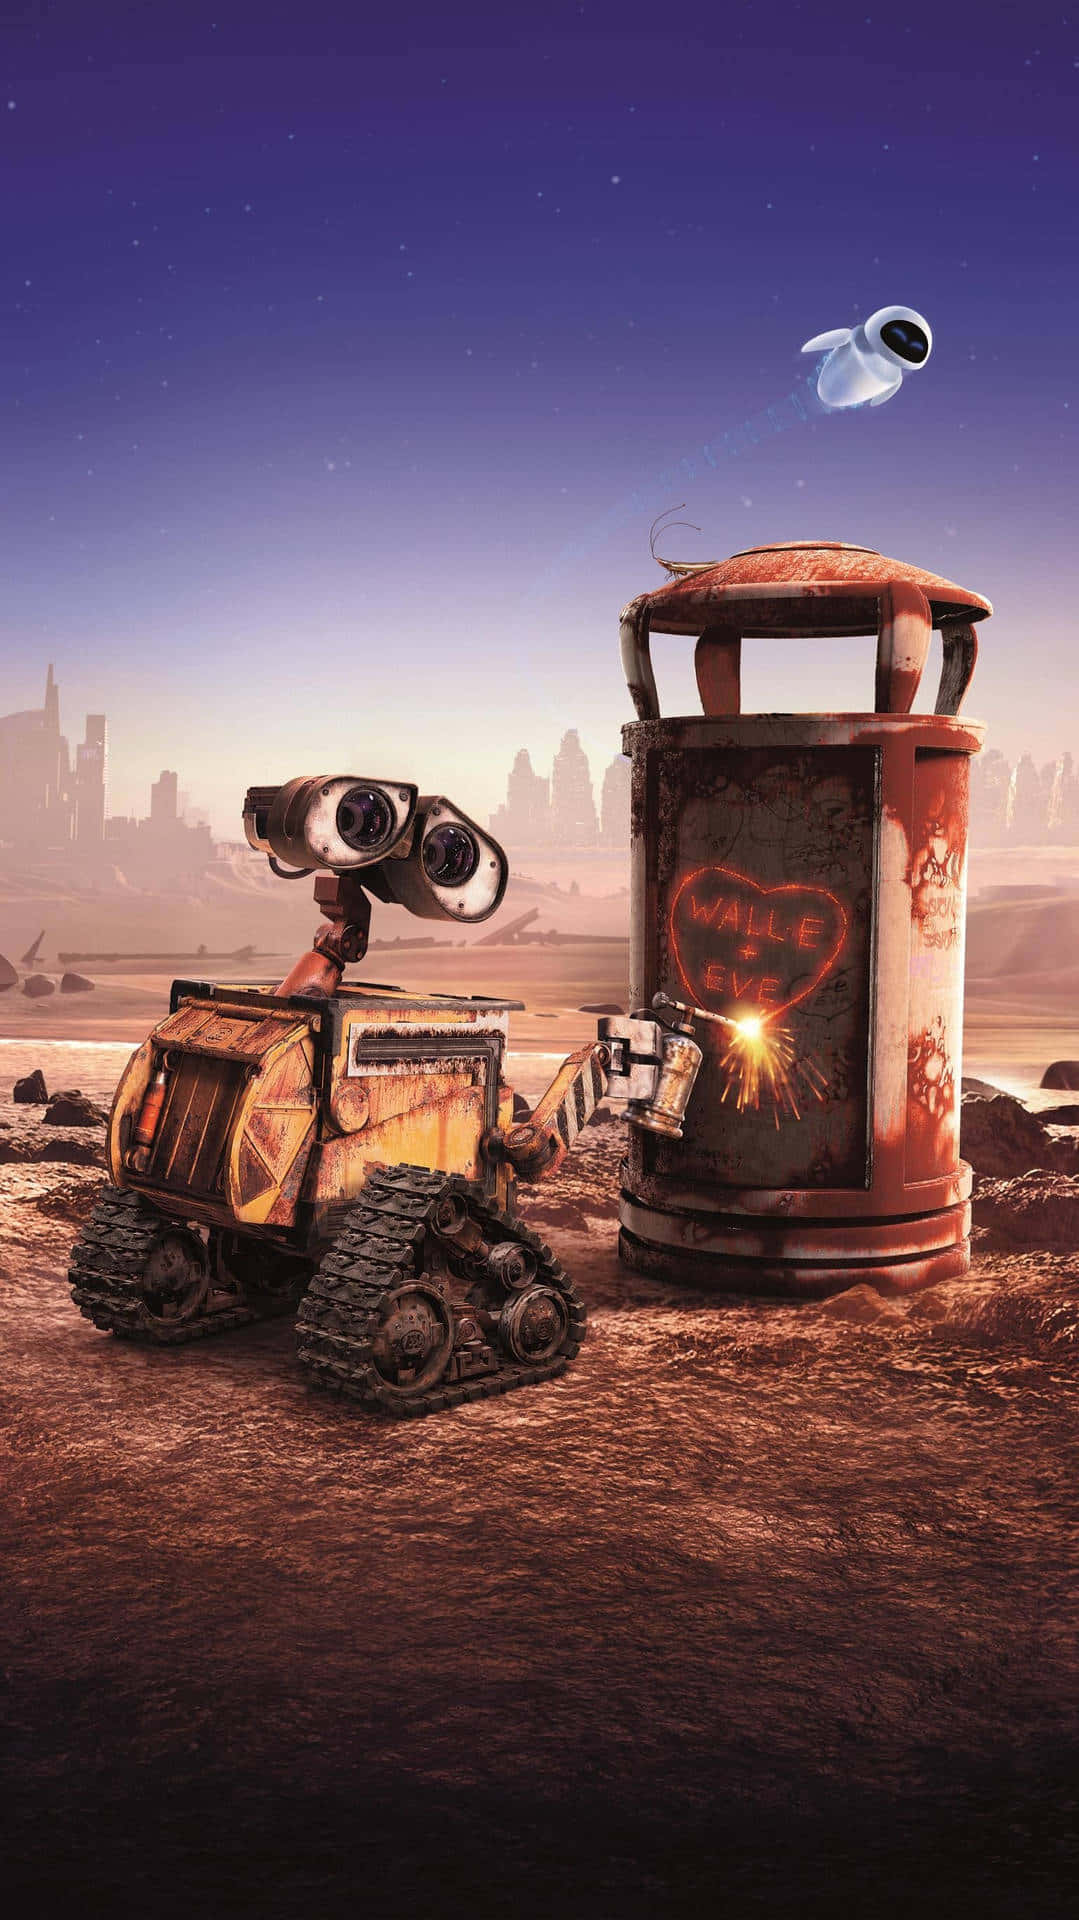 Love Art For Eve By Wall E Iphone Wallpaper